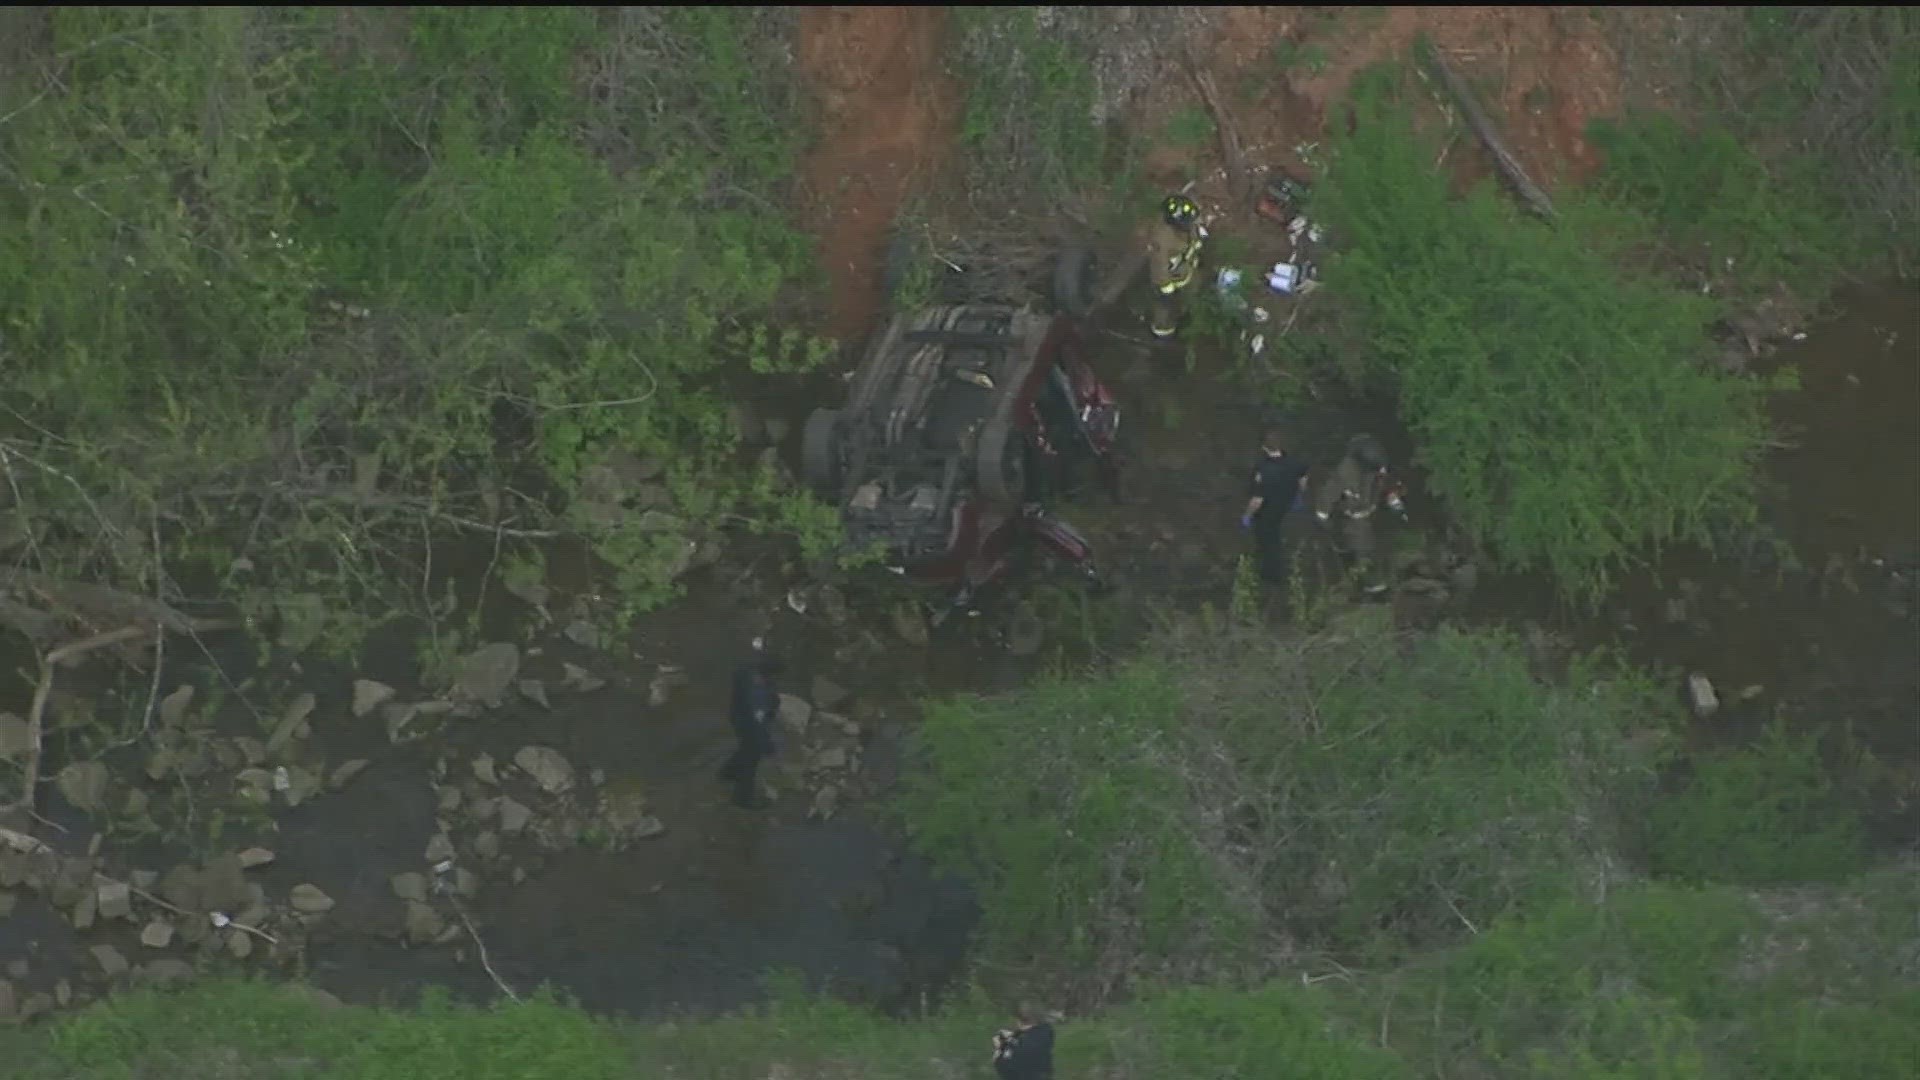 11Alive's SkyTracker was over the scene, where the car was seen flipped over in a creek with what appeared to be at least a dozen first responders on scene.